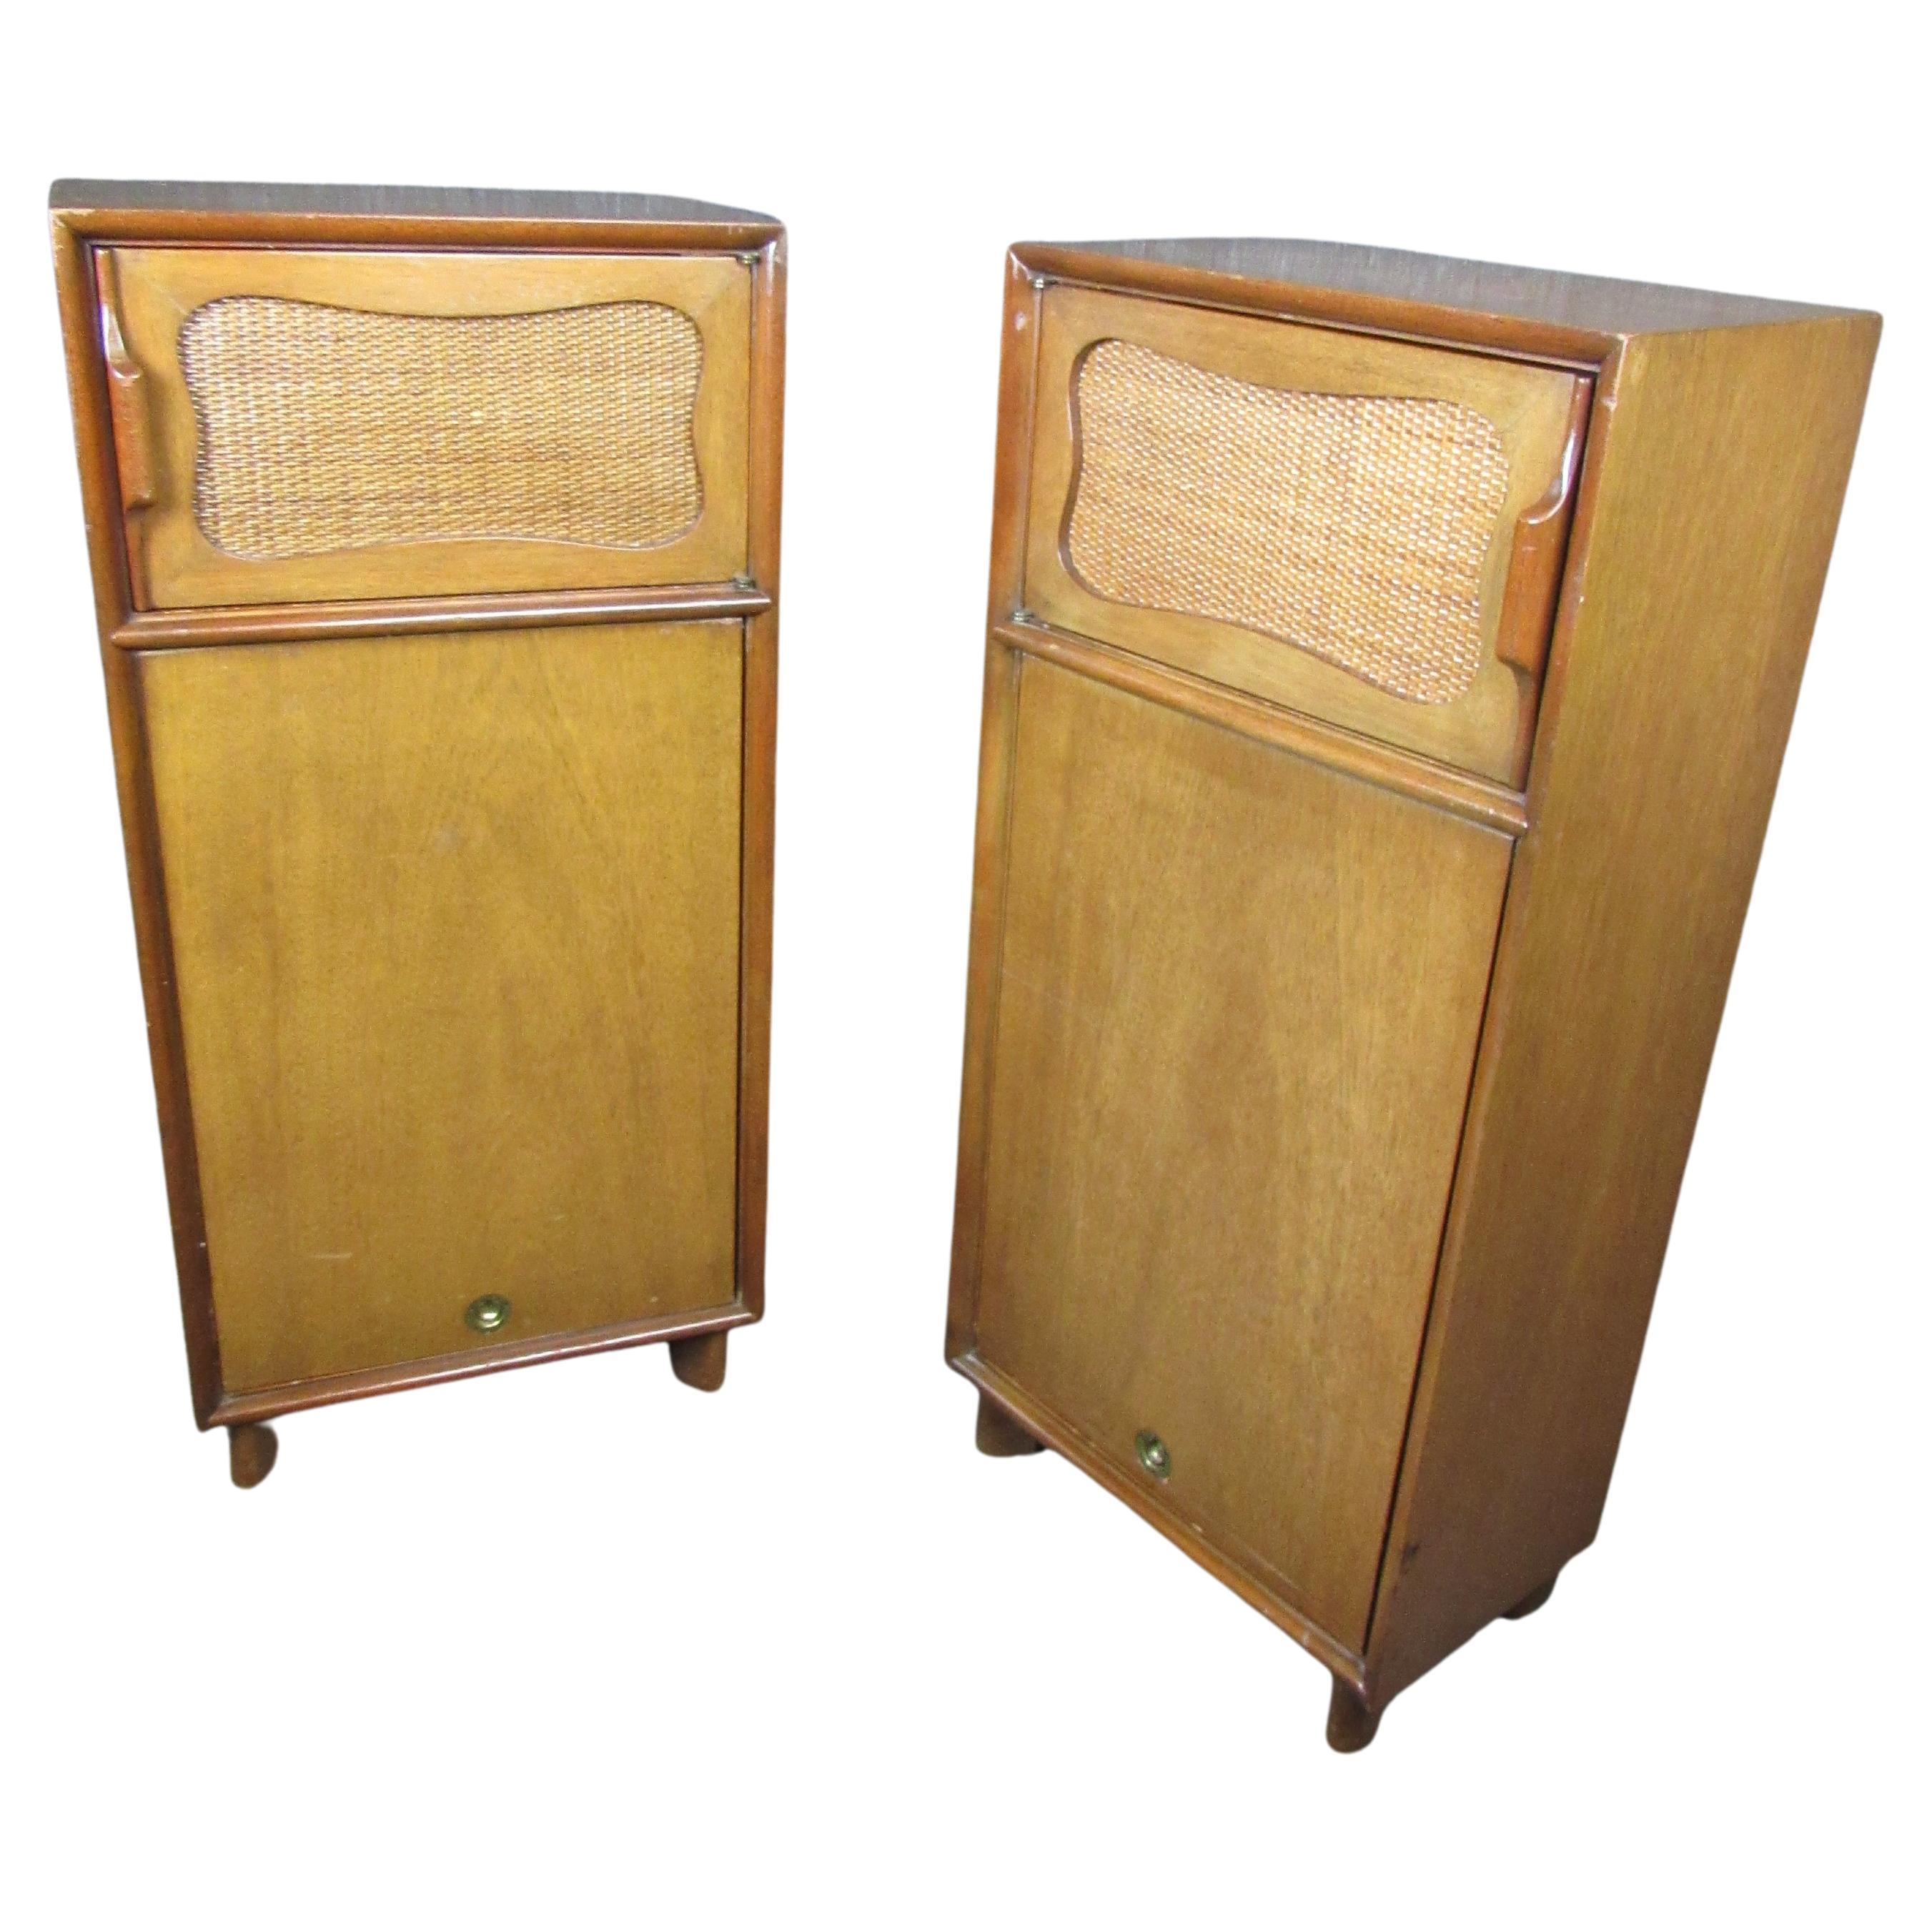 Midcentury "Malacca Modern" Cabinets by Hickory For Sale